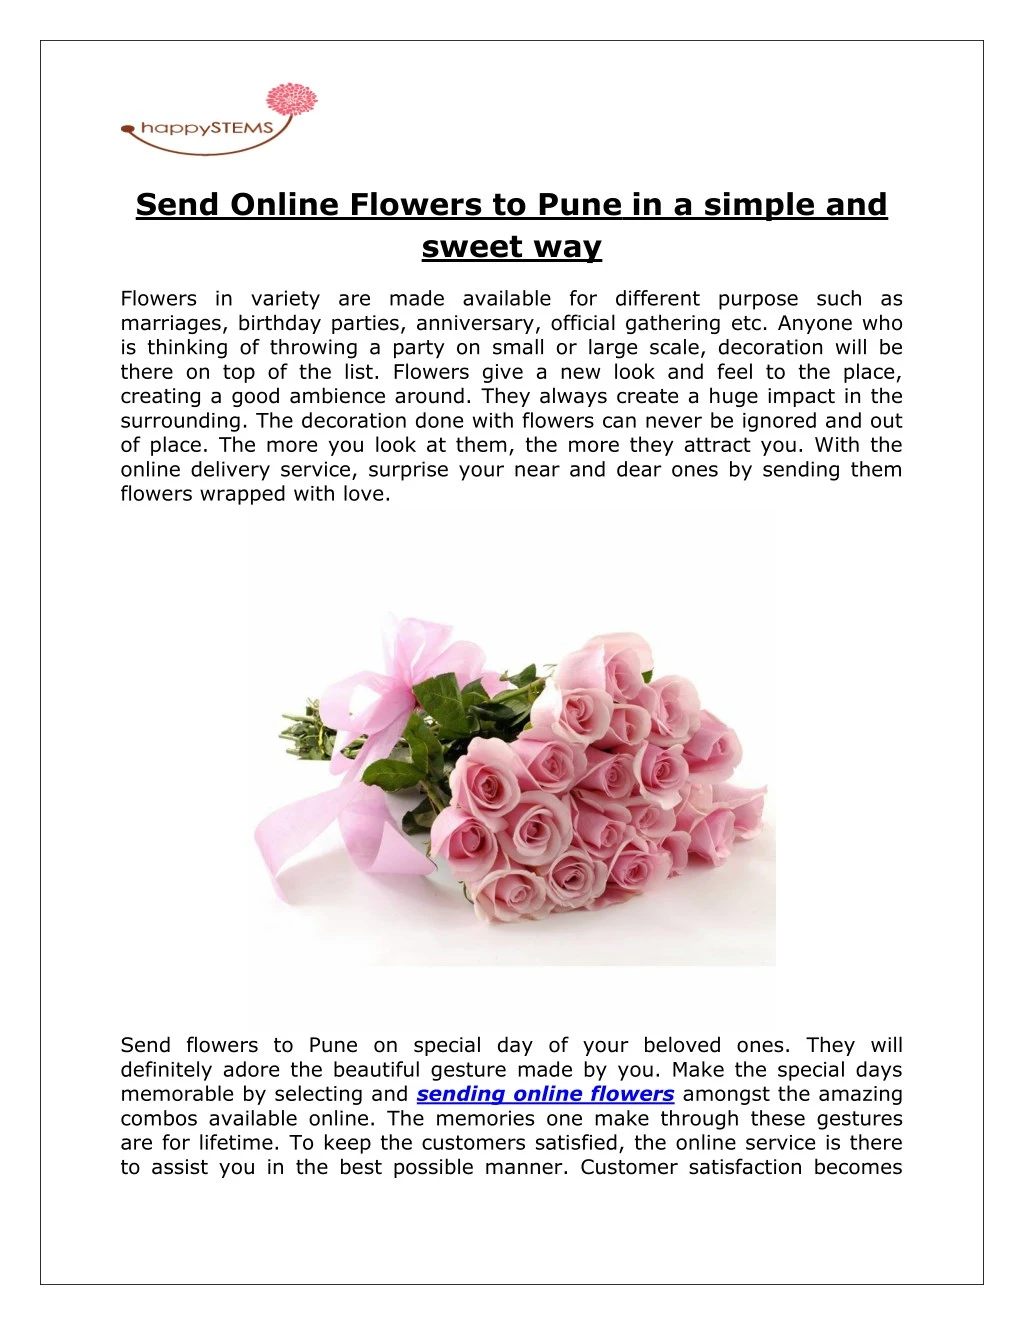 send online flowers to pune in a simple and sweet